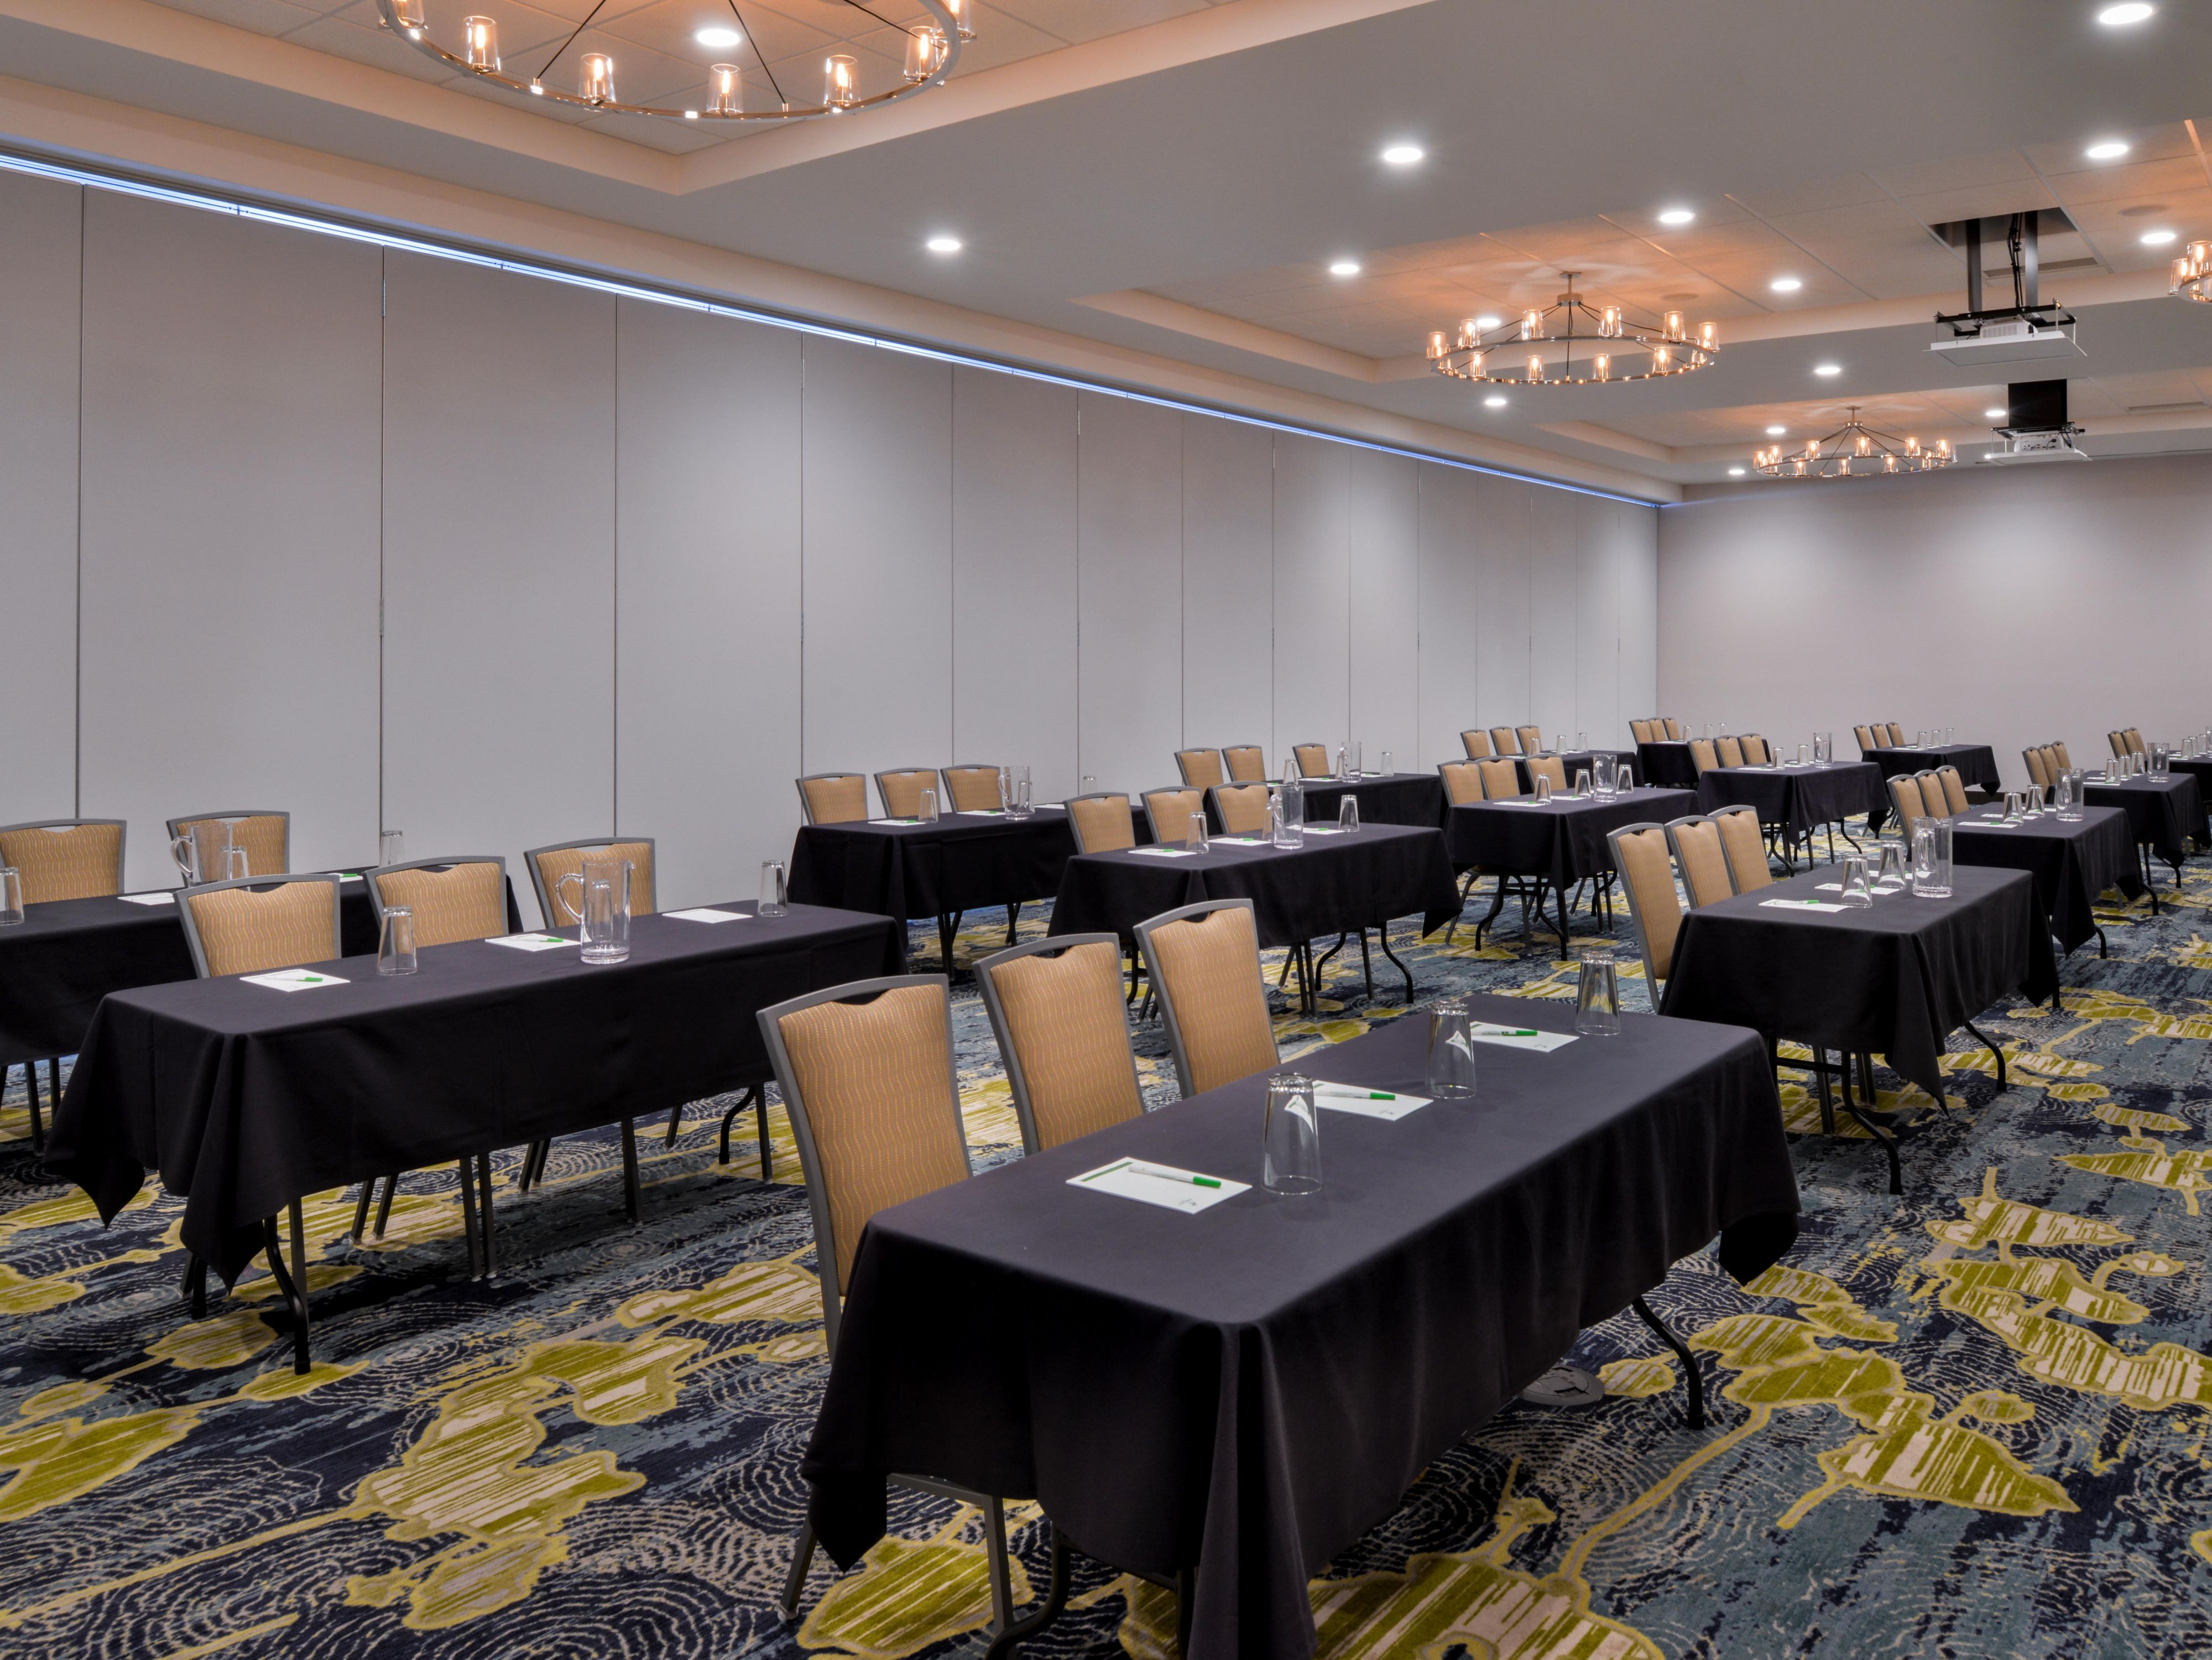 Plan your next business meeting or event in our flexible event space in Livonia. Our hotel includes a 6,000 square-foot ballroom that can accommodate 350 guests. Let our team help you with catering, audiovisual, and group rooms. Our hotel is right off I-275 and 20 minutes from Detroit Metro Airport, making travel for guests easy.